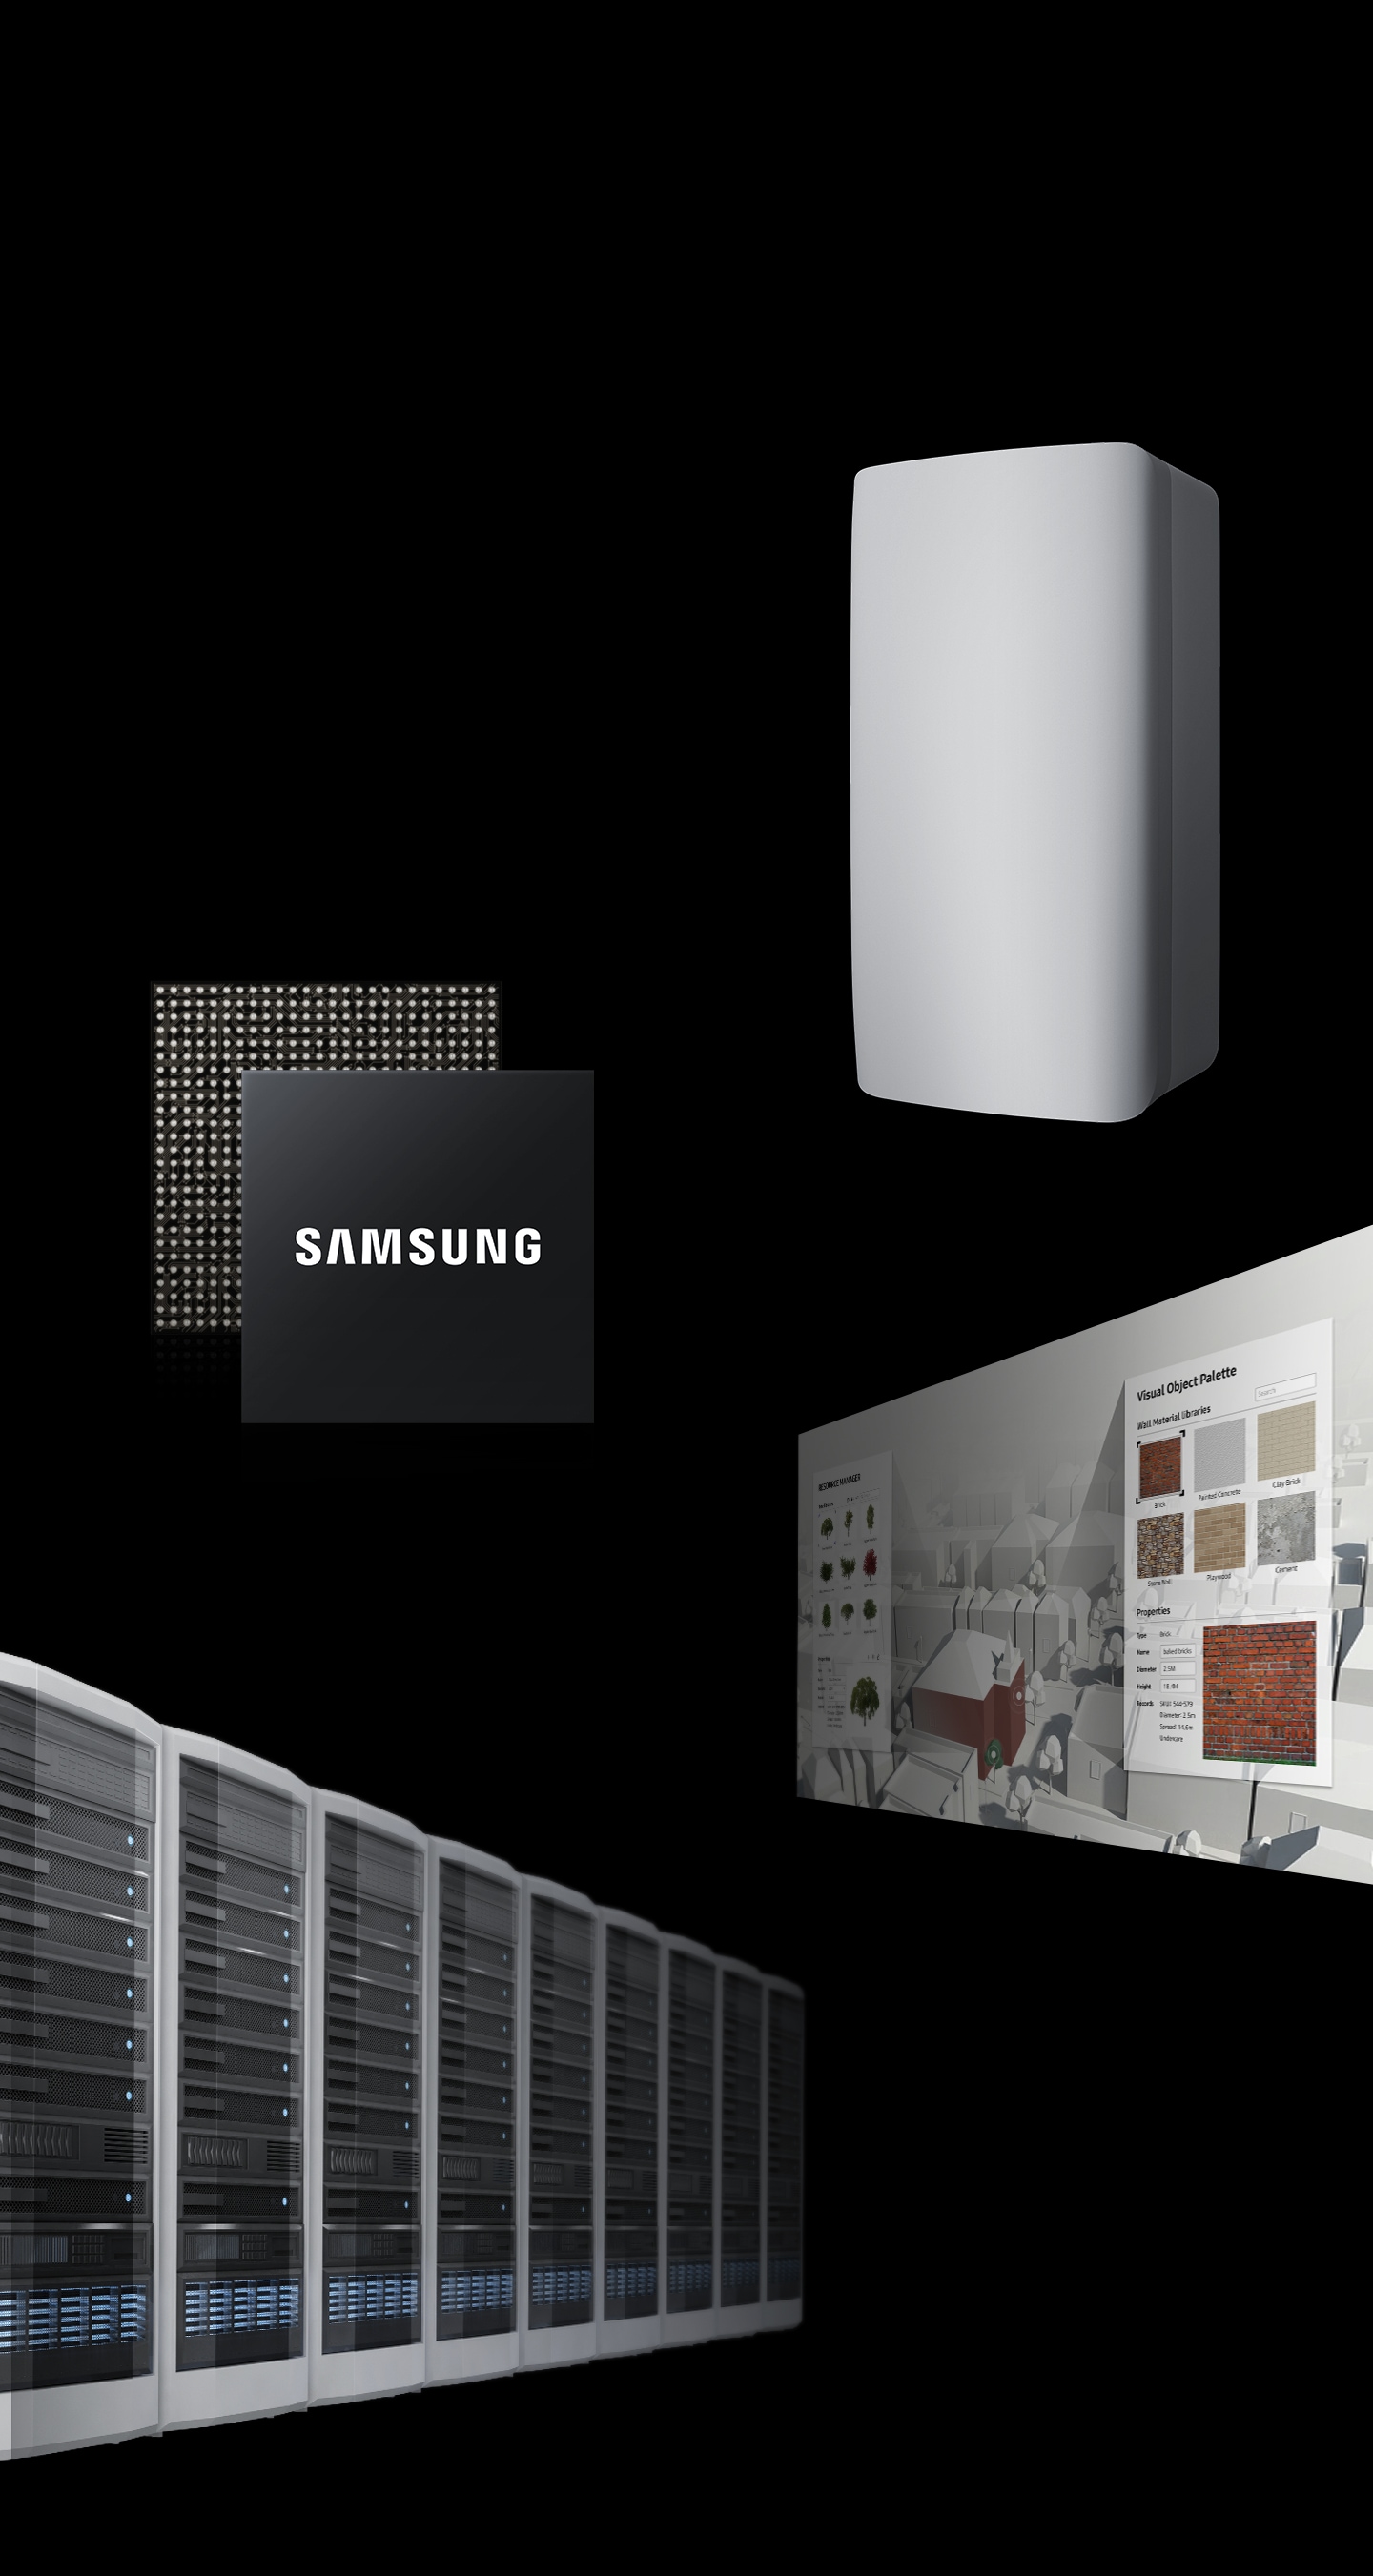 An illustrative image demonstrates Samsung Networks' end-to-end 5G network portfolio, including chipsets, devices, radio and core equipment, as well as professional services based on AI.